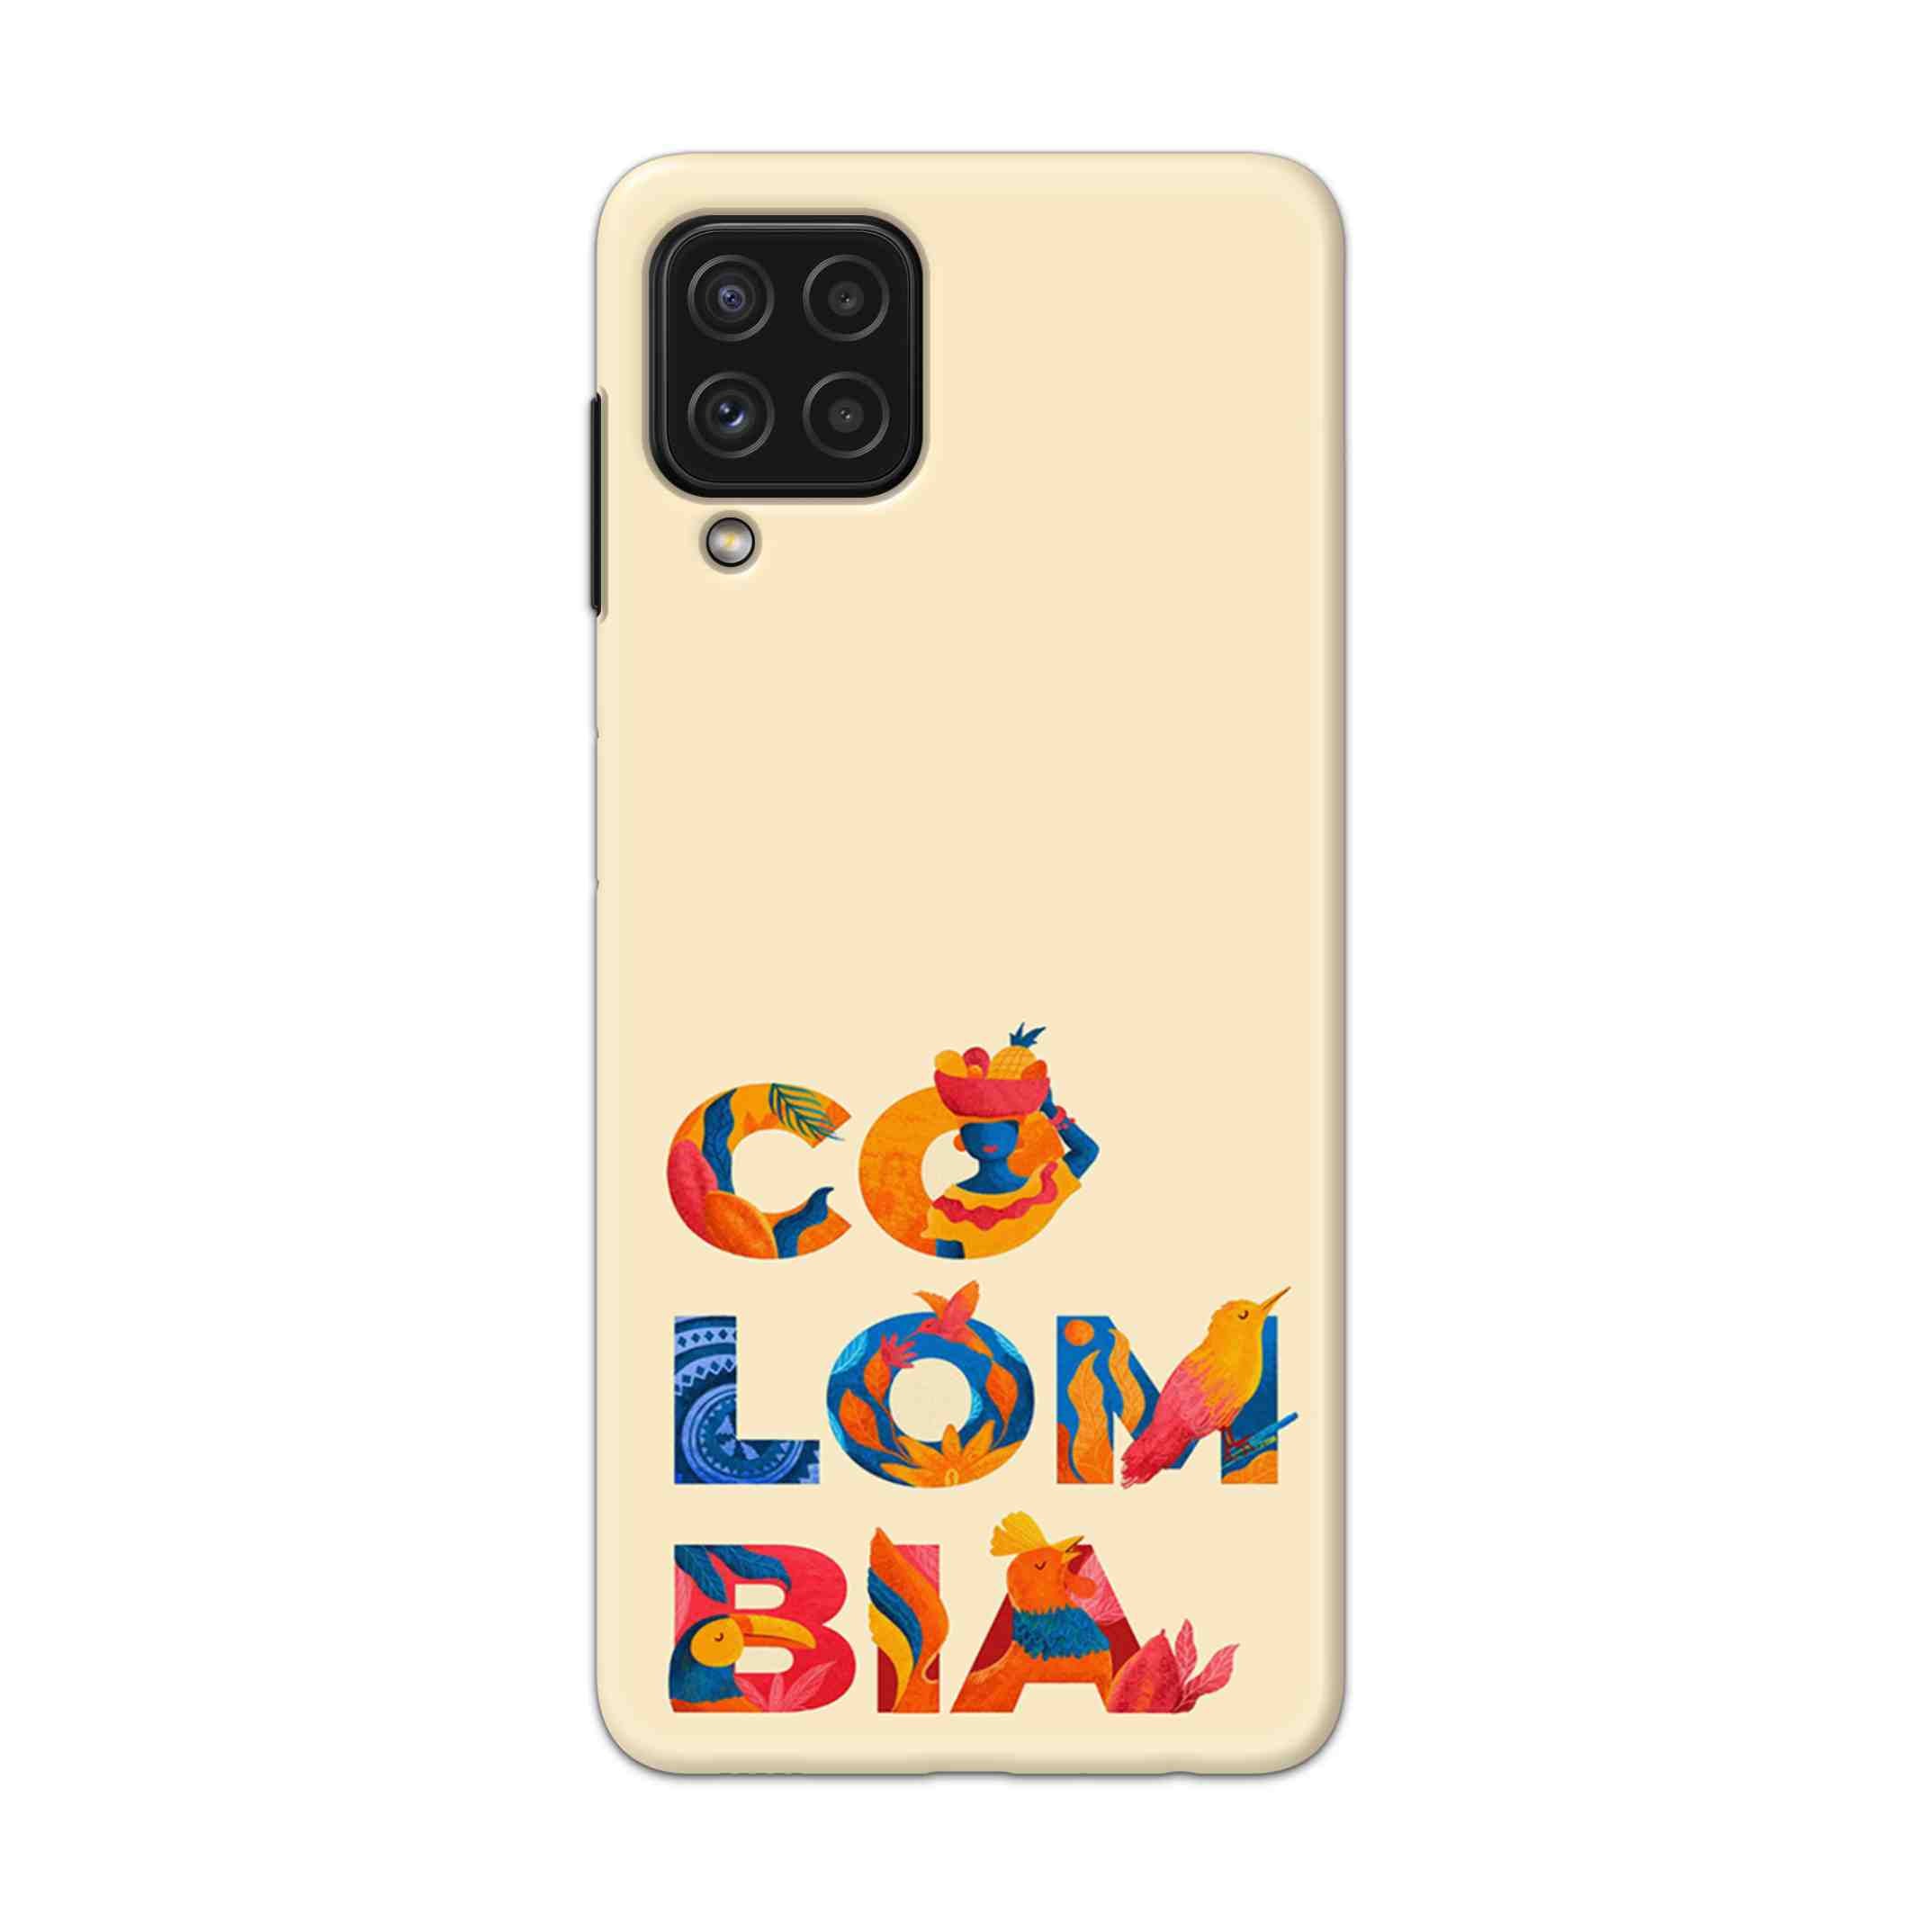 Buy Colombia Hard Back Mobile Phone Case Cover For Samsung Galaxy A22 Online